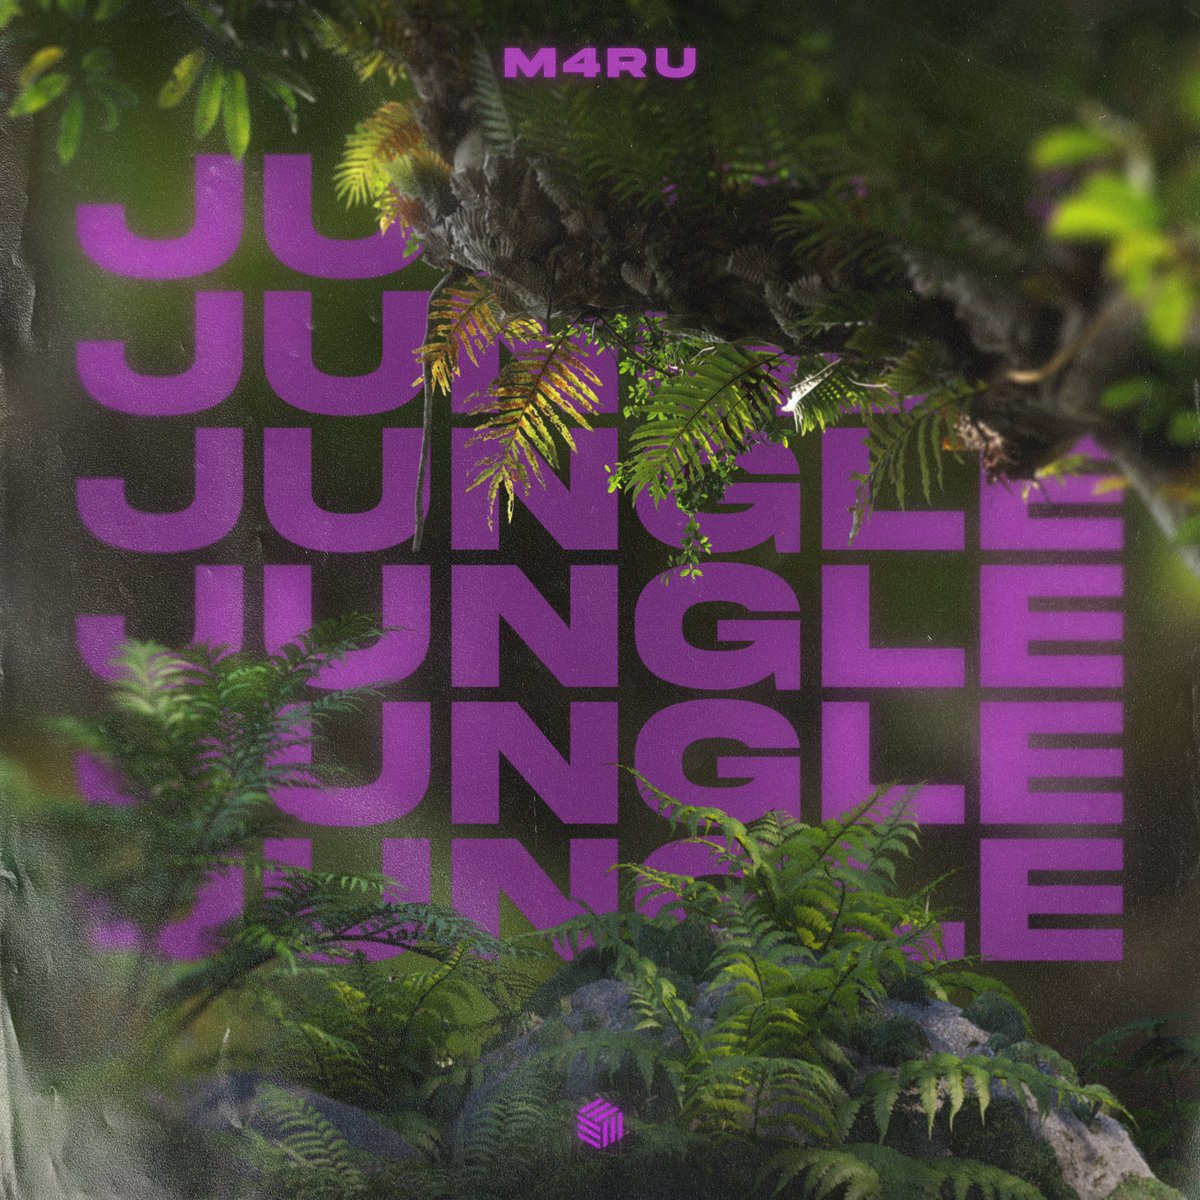 My new single ‘Jungle’ will be out on January 19th🍃
Are you guys ready?
.
#music #newmusic #m4ru #edm #edmmusic #basshouse #basshousemusic #futurehouse #futurehousemusic #jungle #futurehousecloud #newsingle #newmusic #instagram #threads #facebook #twitter #announcement 
.
🎶